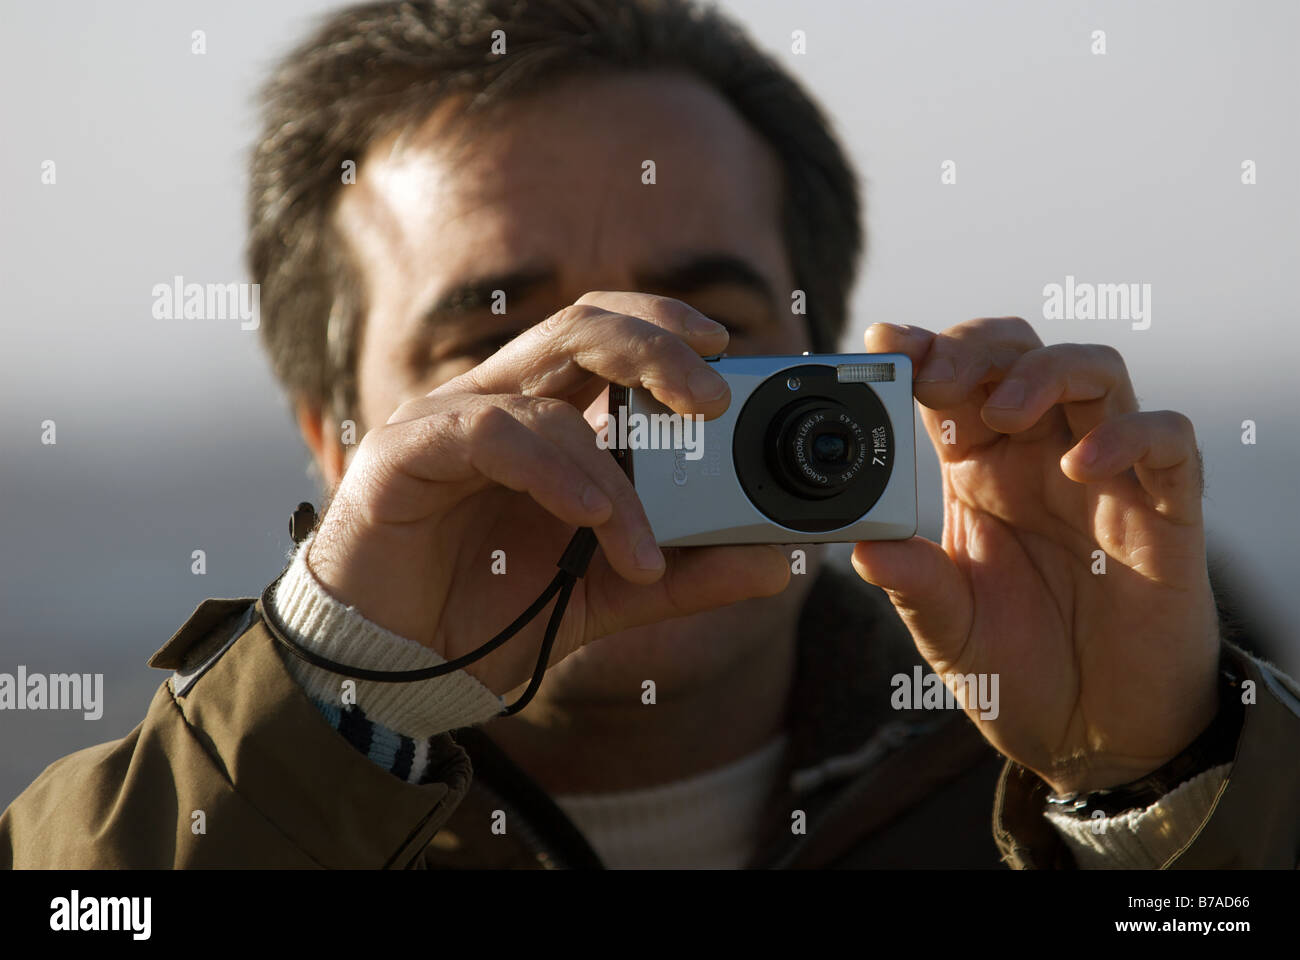 Man taking a picture using a Canon Ixus 75 digital camera. Stock Photo